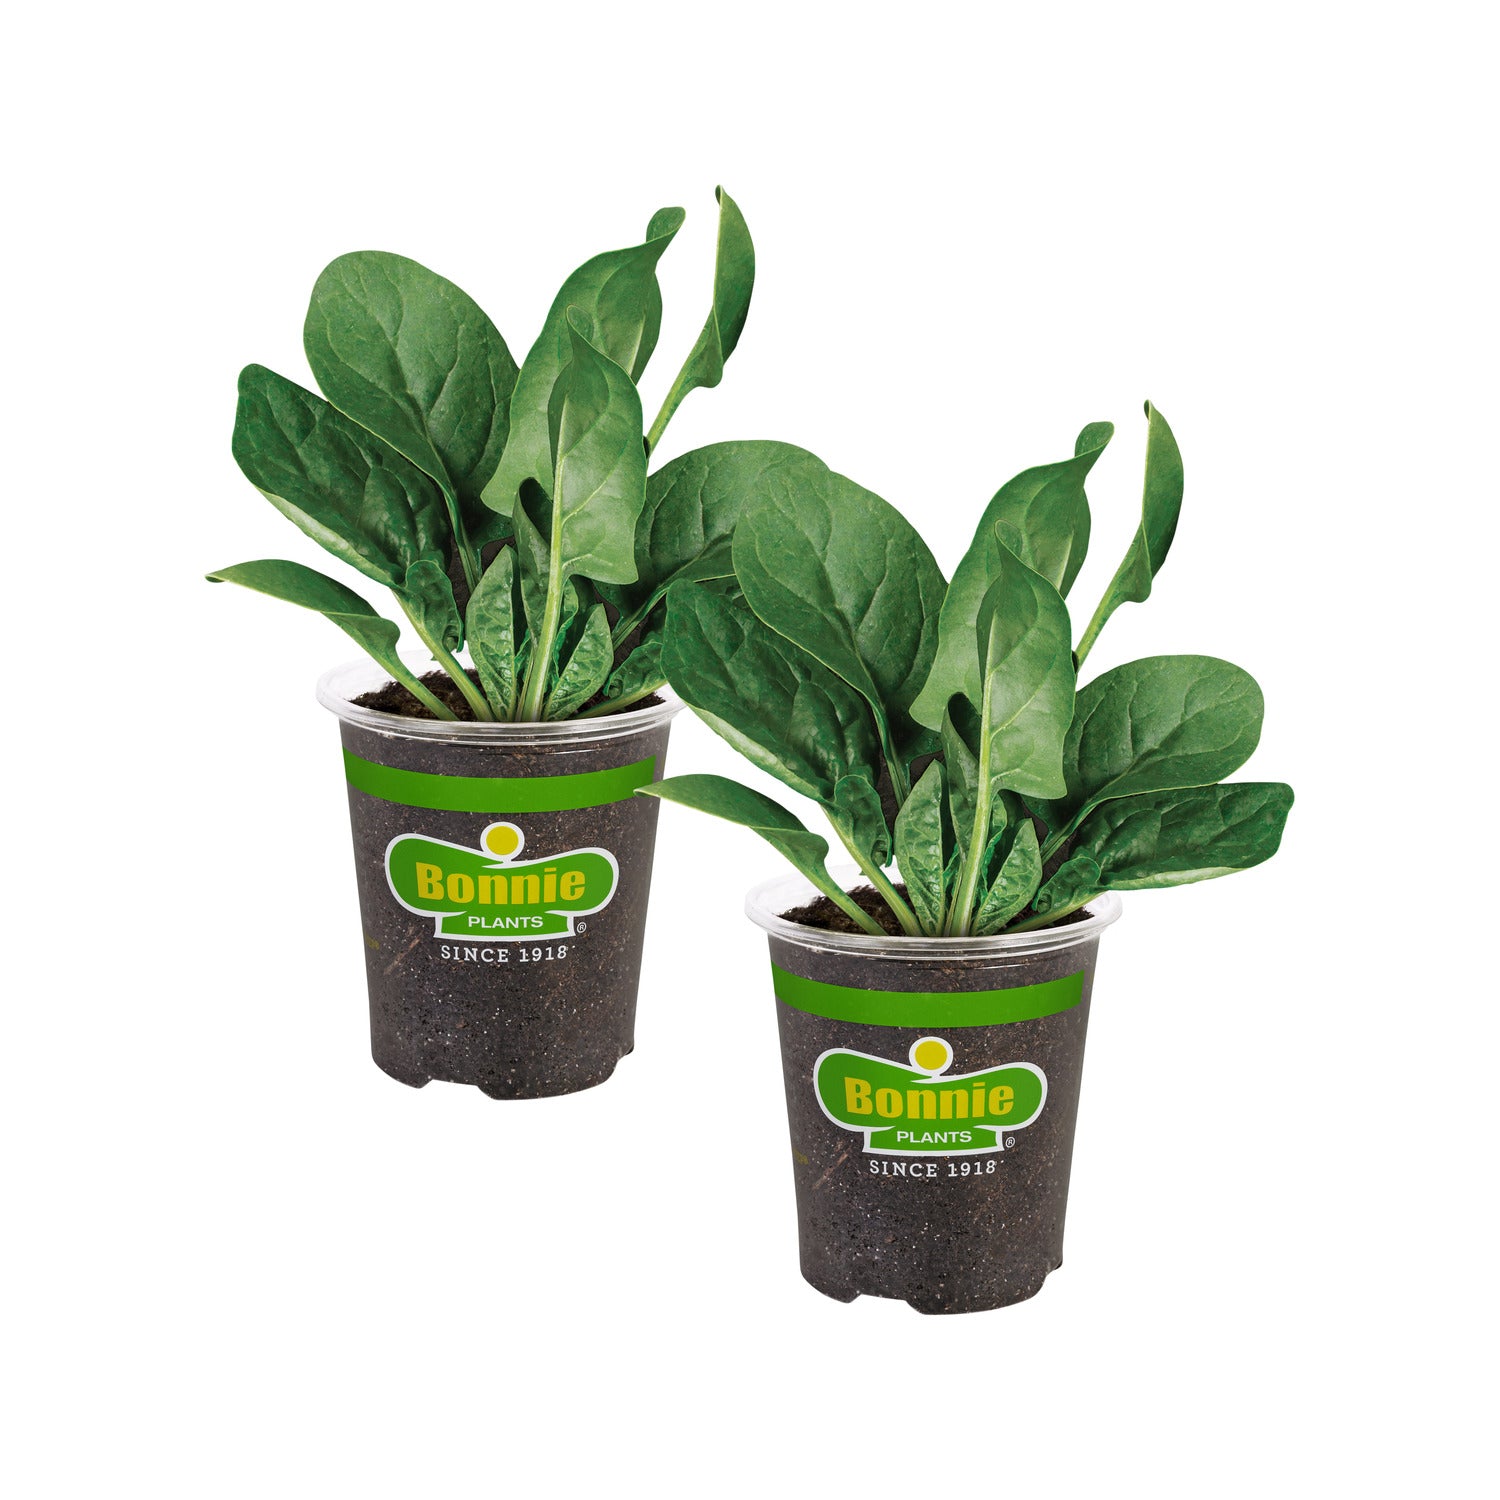 Spinach (2 Pack)